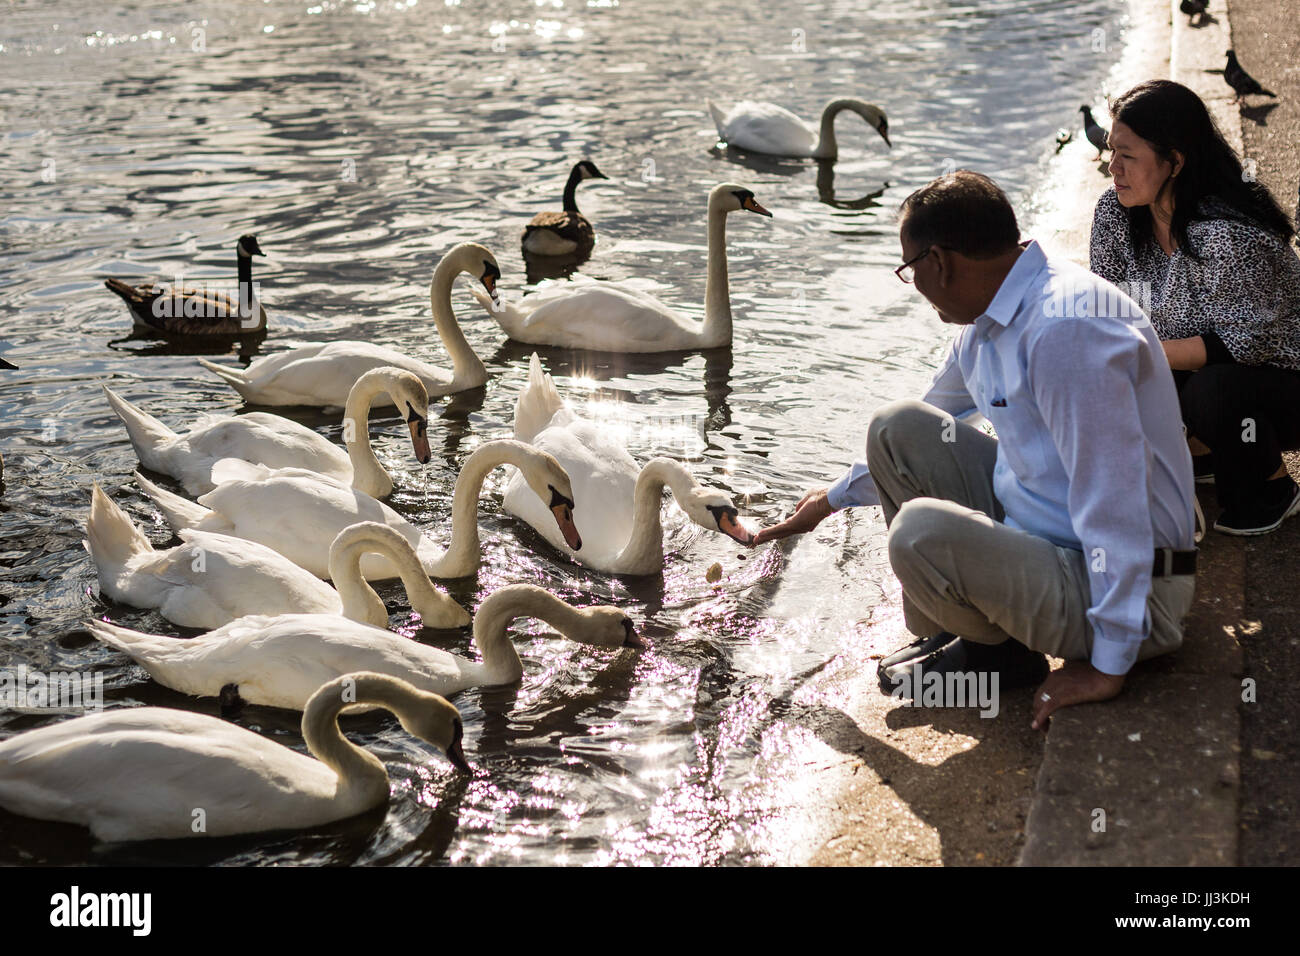 London, UK. 18th July, 2017. UK Weather: Feeding the swans on the Serpentine Lake in Hyde Park on a warm afternoon. © Guy Corbishley/Alamy Live News Stock Photo